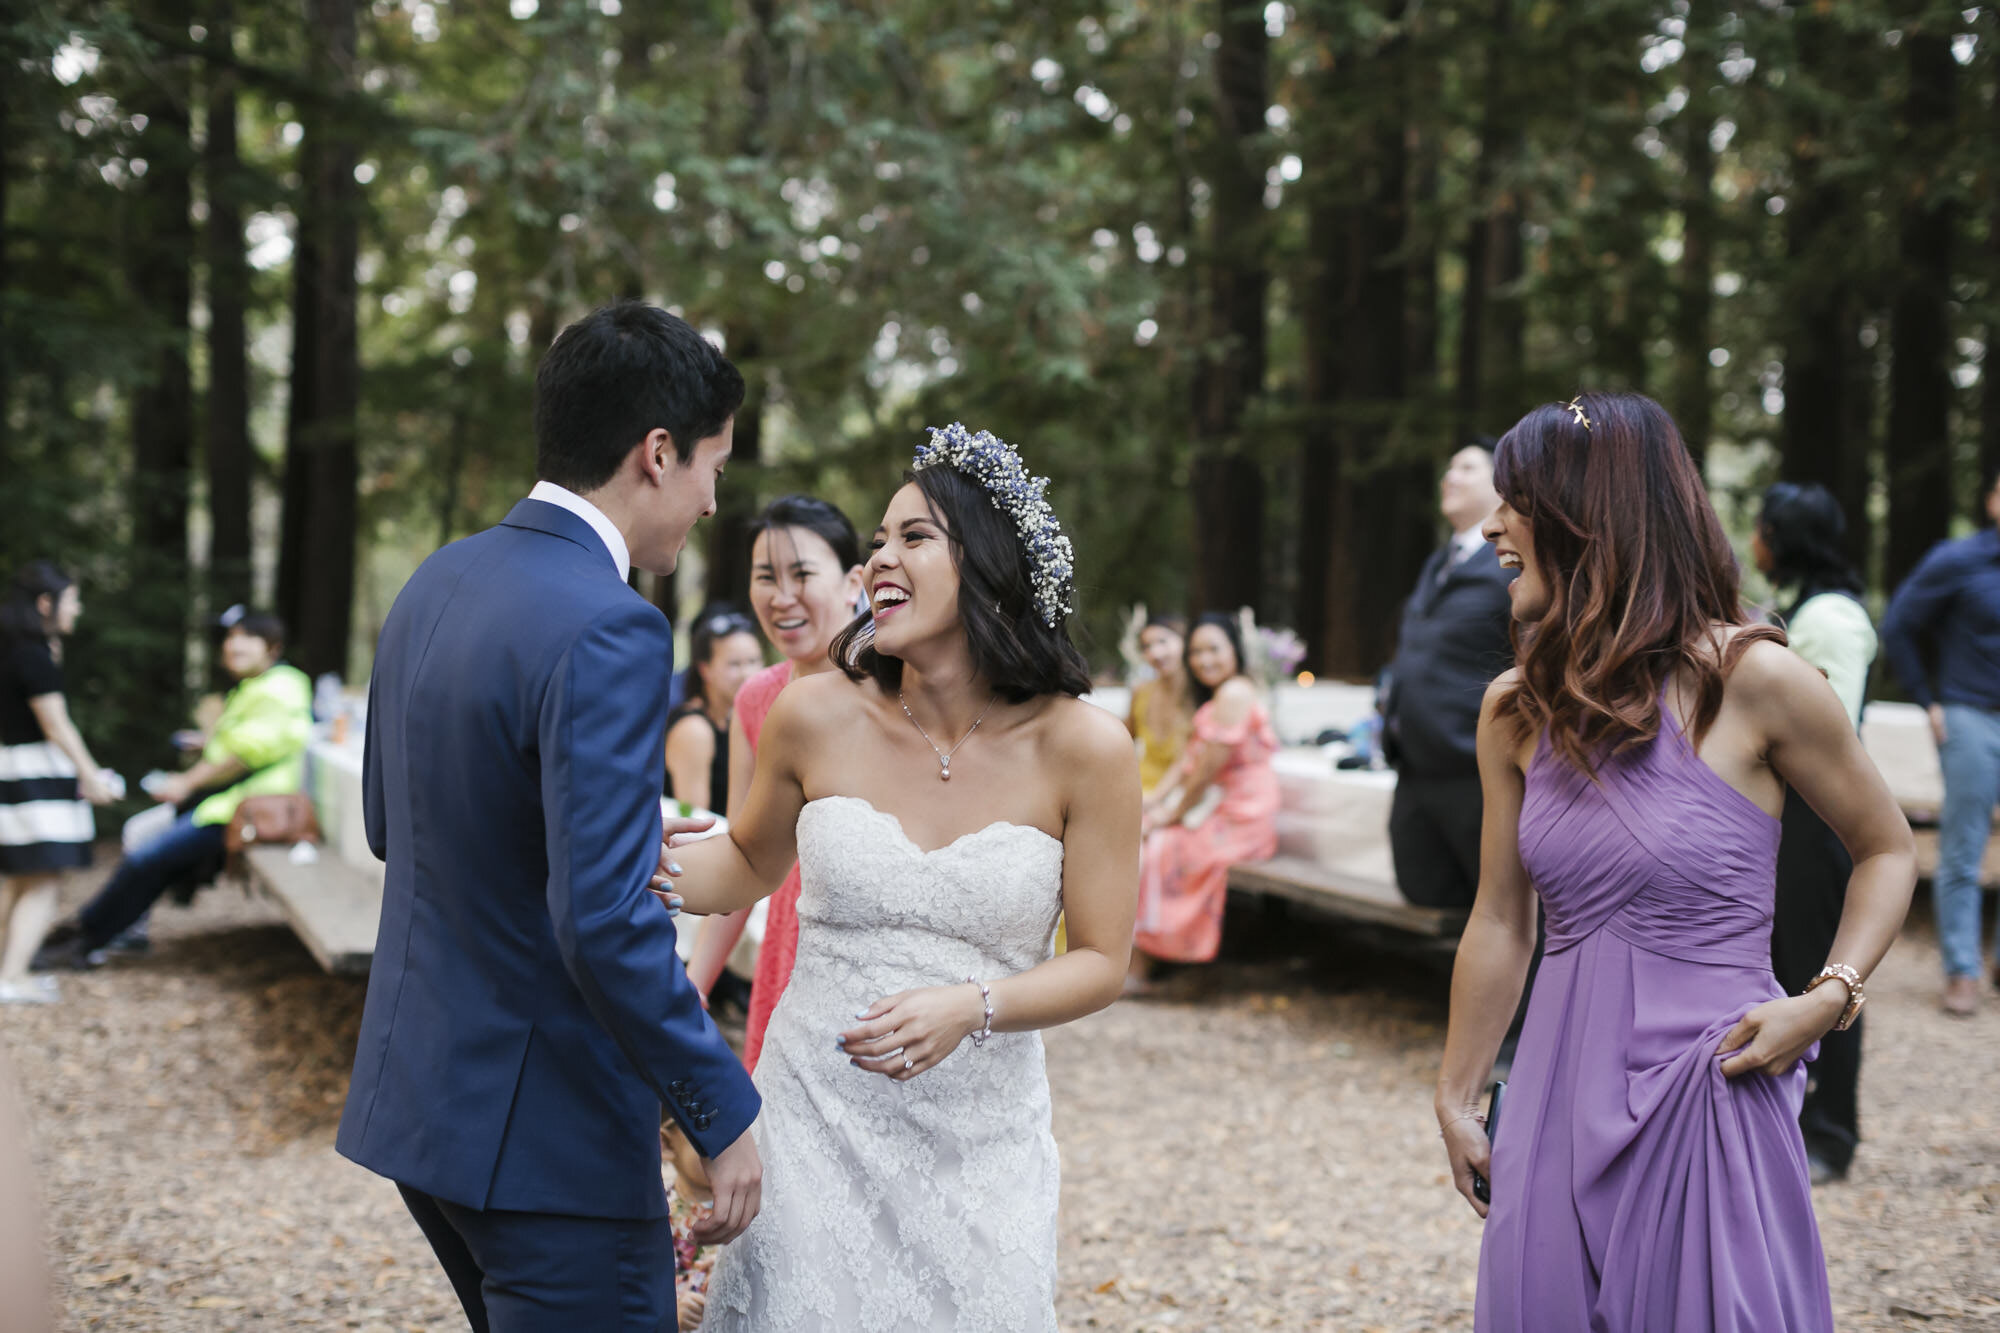 Bride and groom dance together at their picnic wedding reception